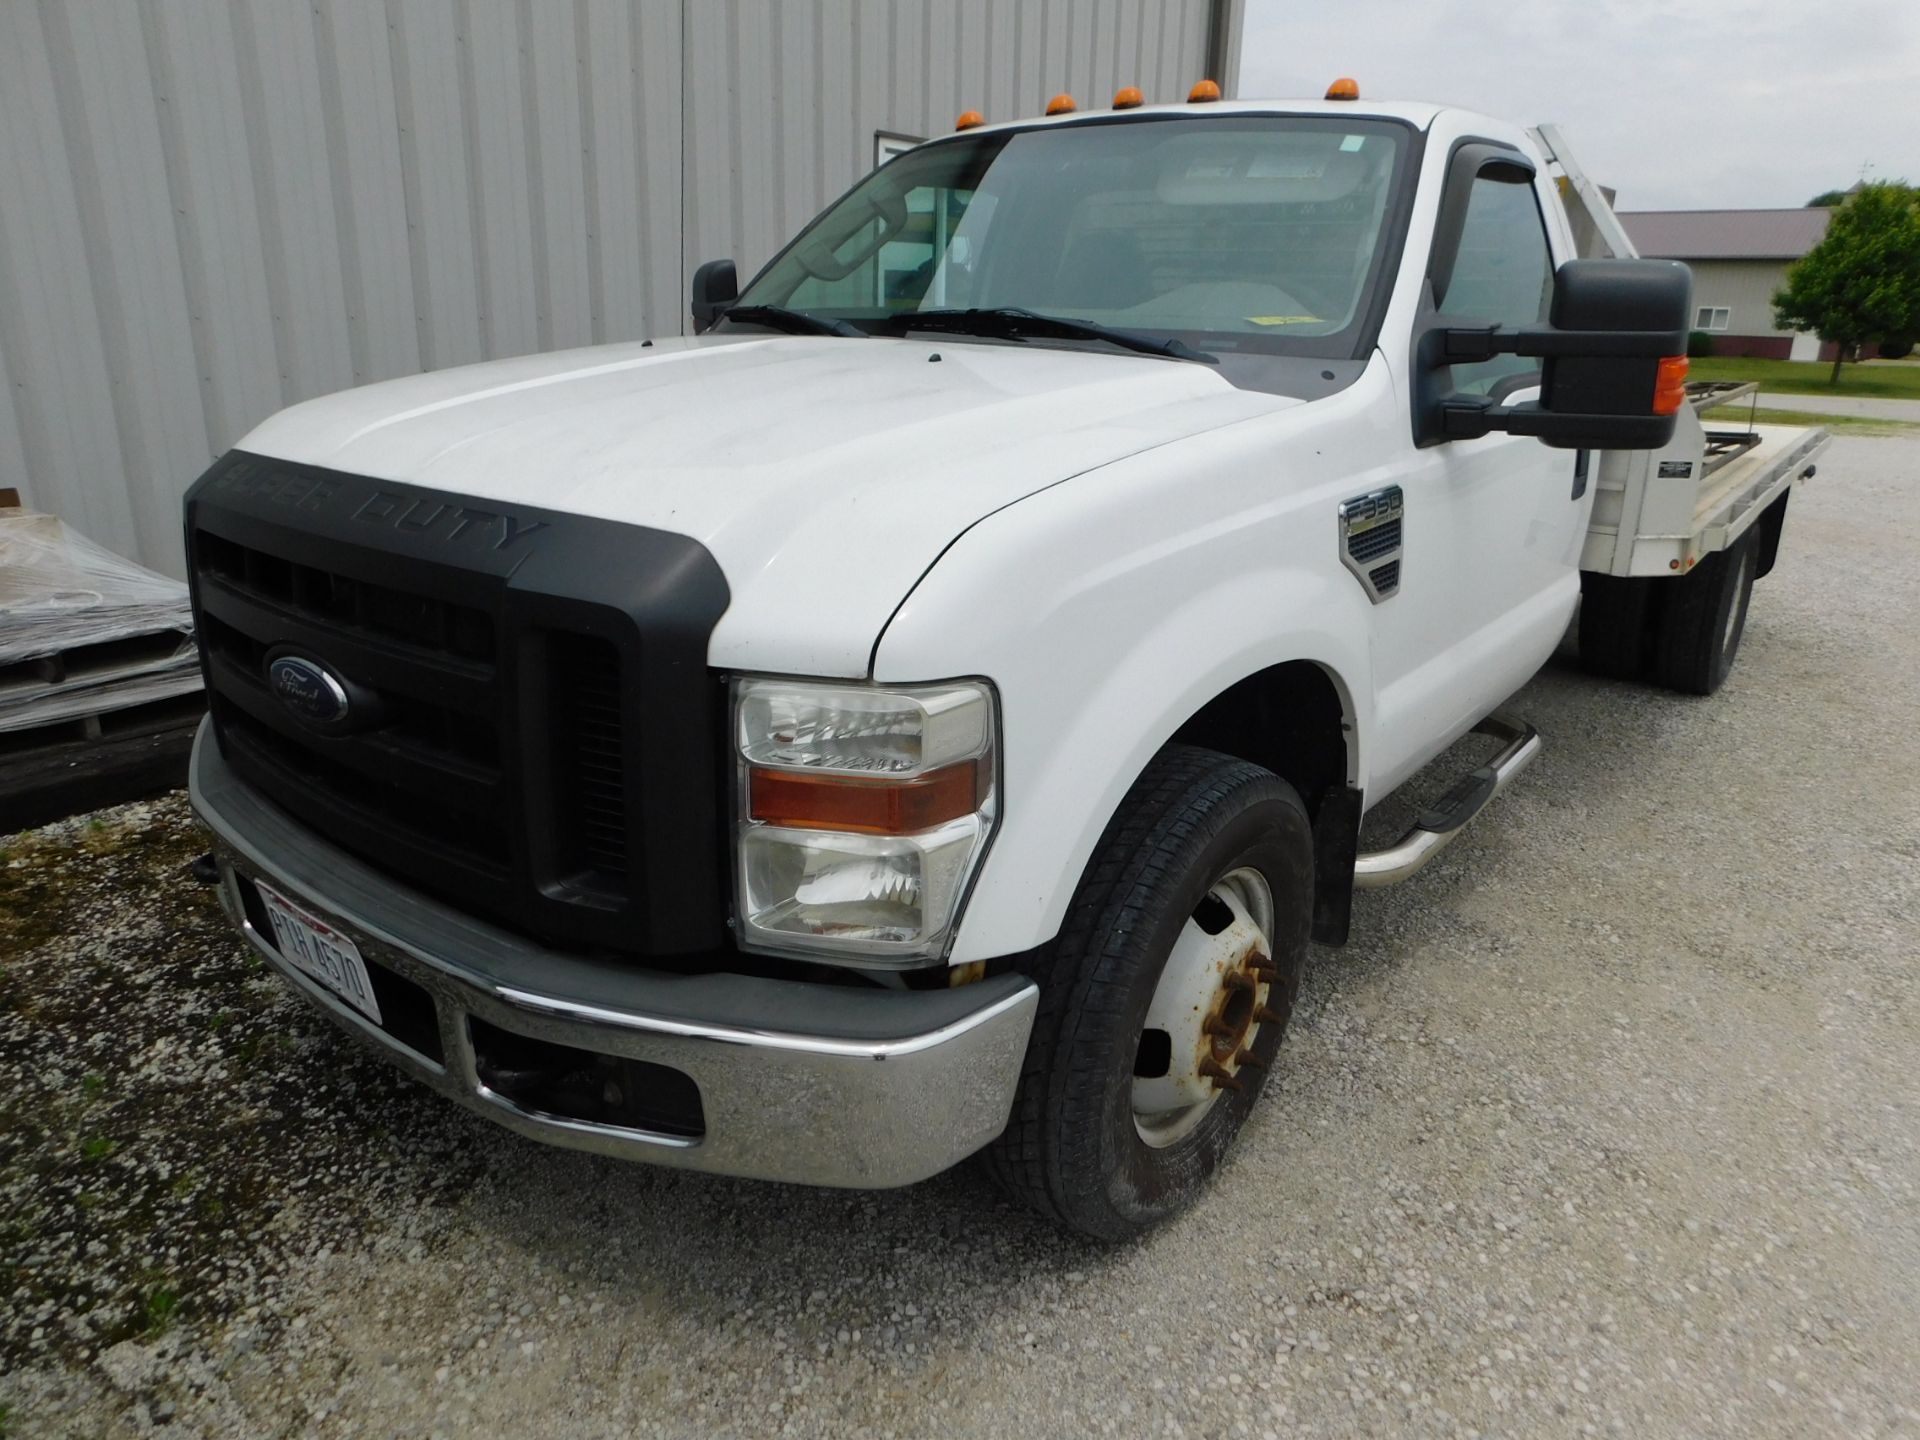 2009 Ford F350 XL Super Duty Stake Bed Truck, VIN 1FDWF36529EA03362, Gas, 123,288 Miles, 12 Ft. X